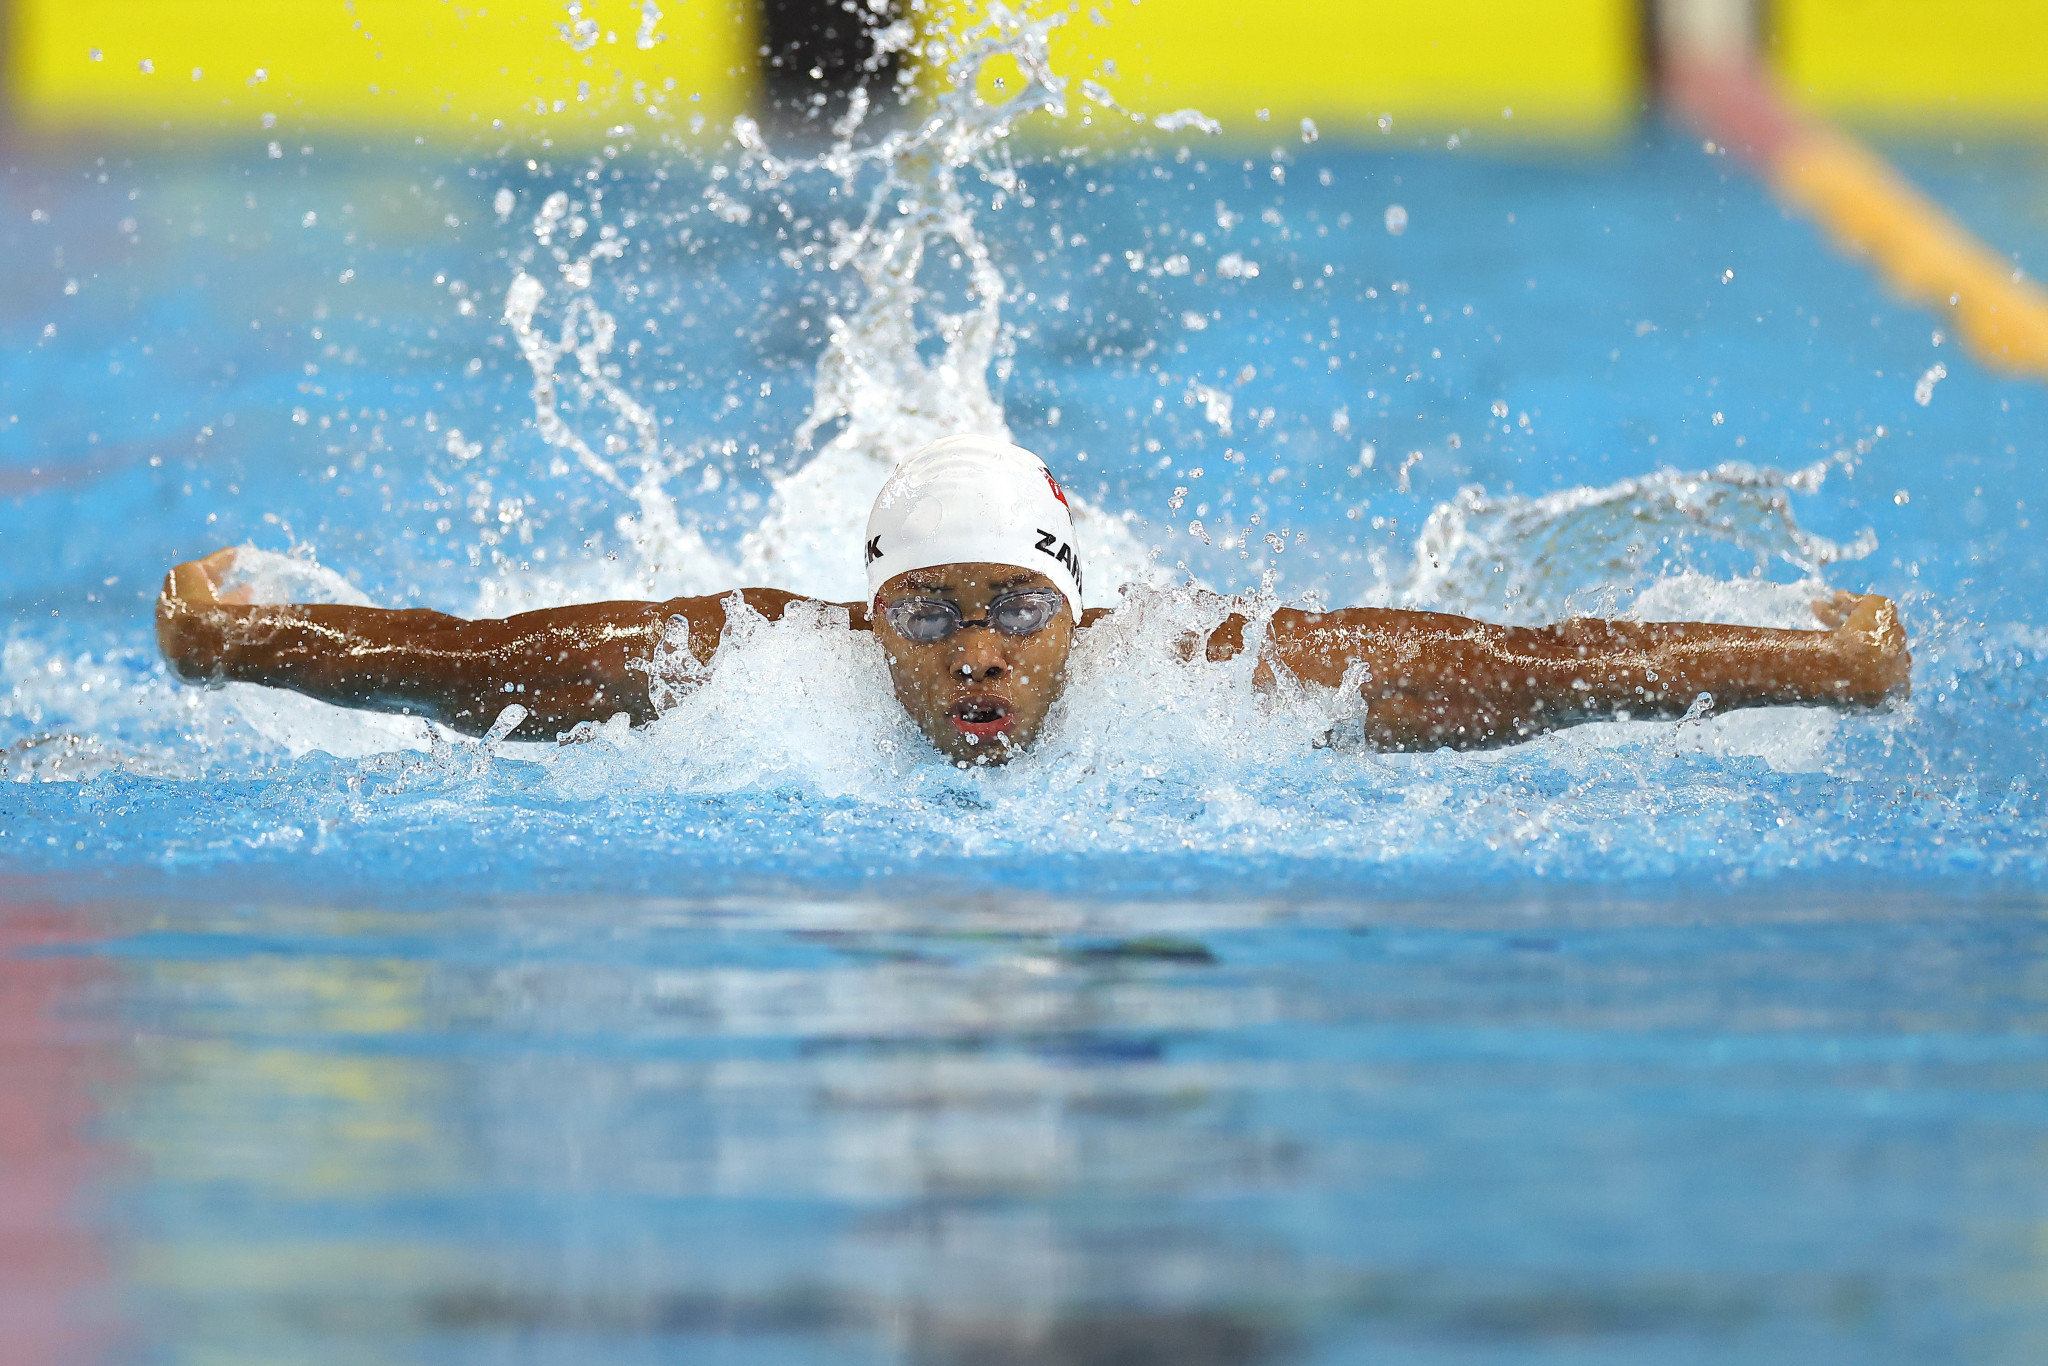 Zarek Wilson set a Commonwealth Youth Games record to win men's 100m butterfly gold for Trinidad and Tobago ©Getty Images